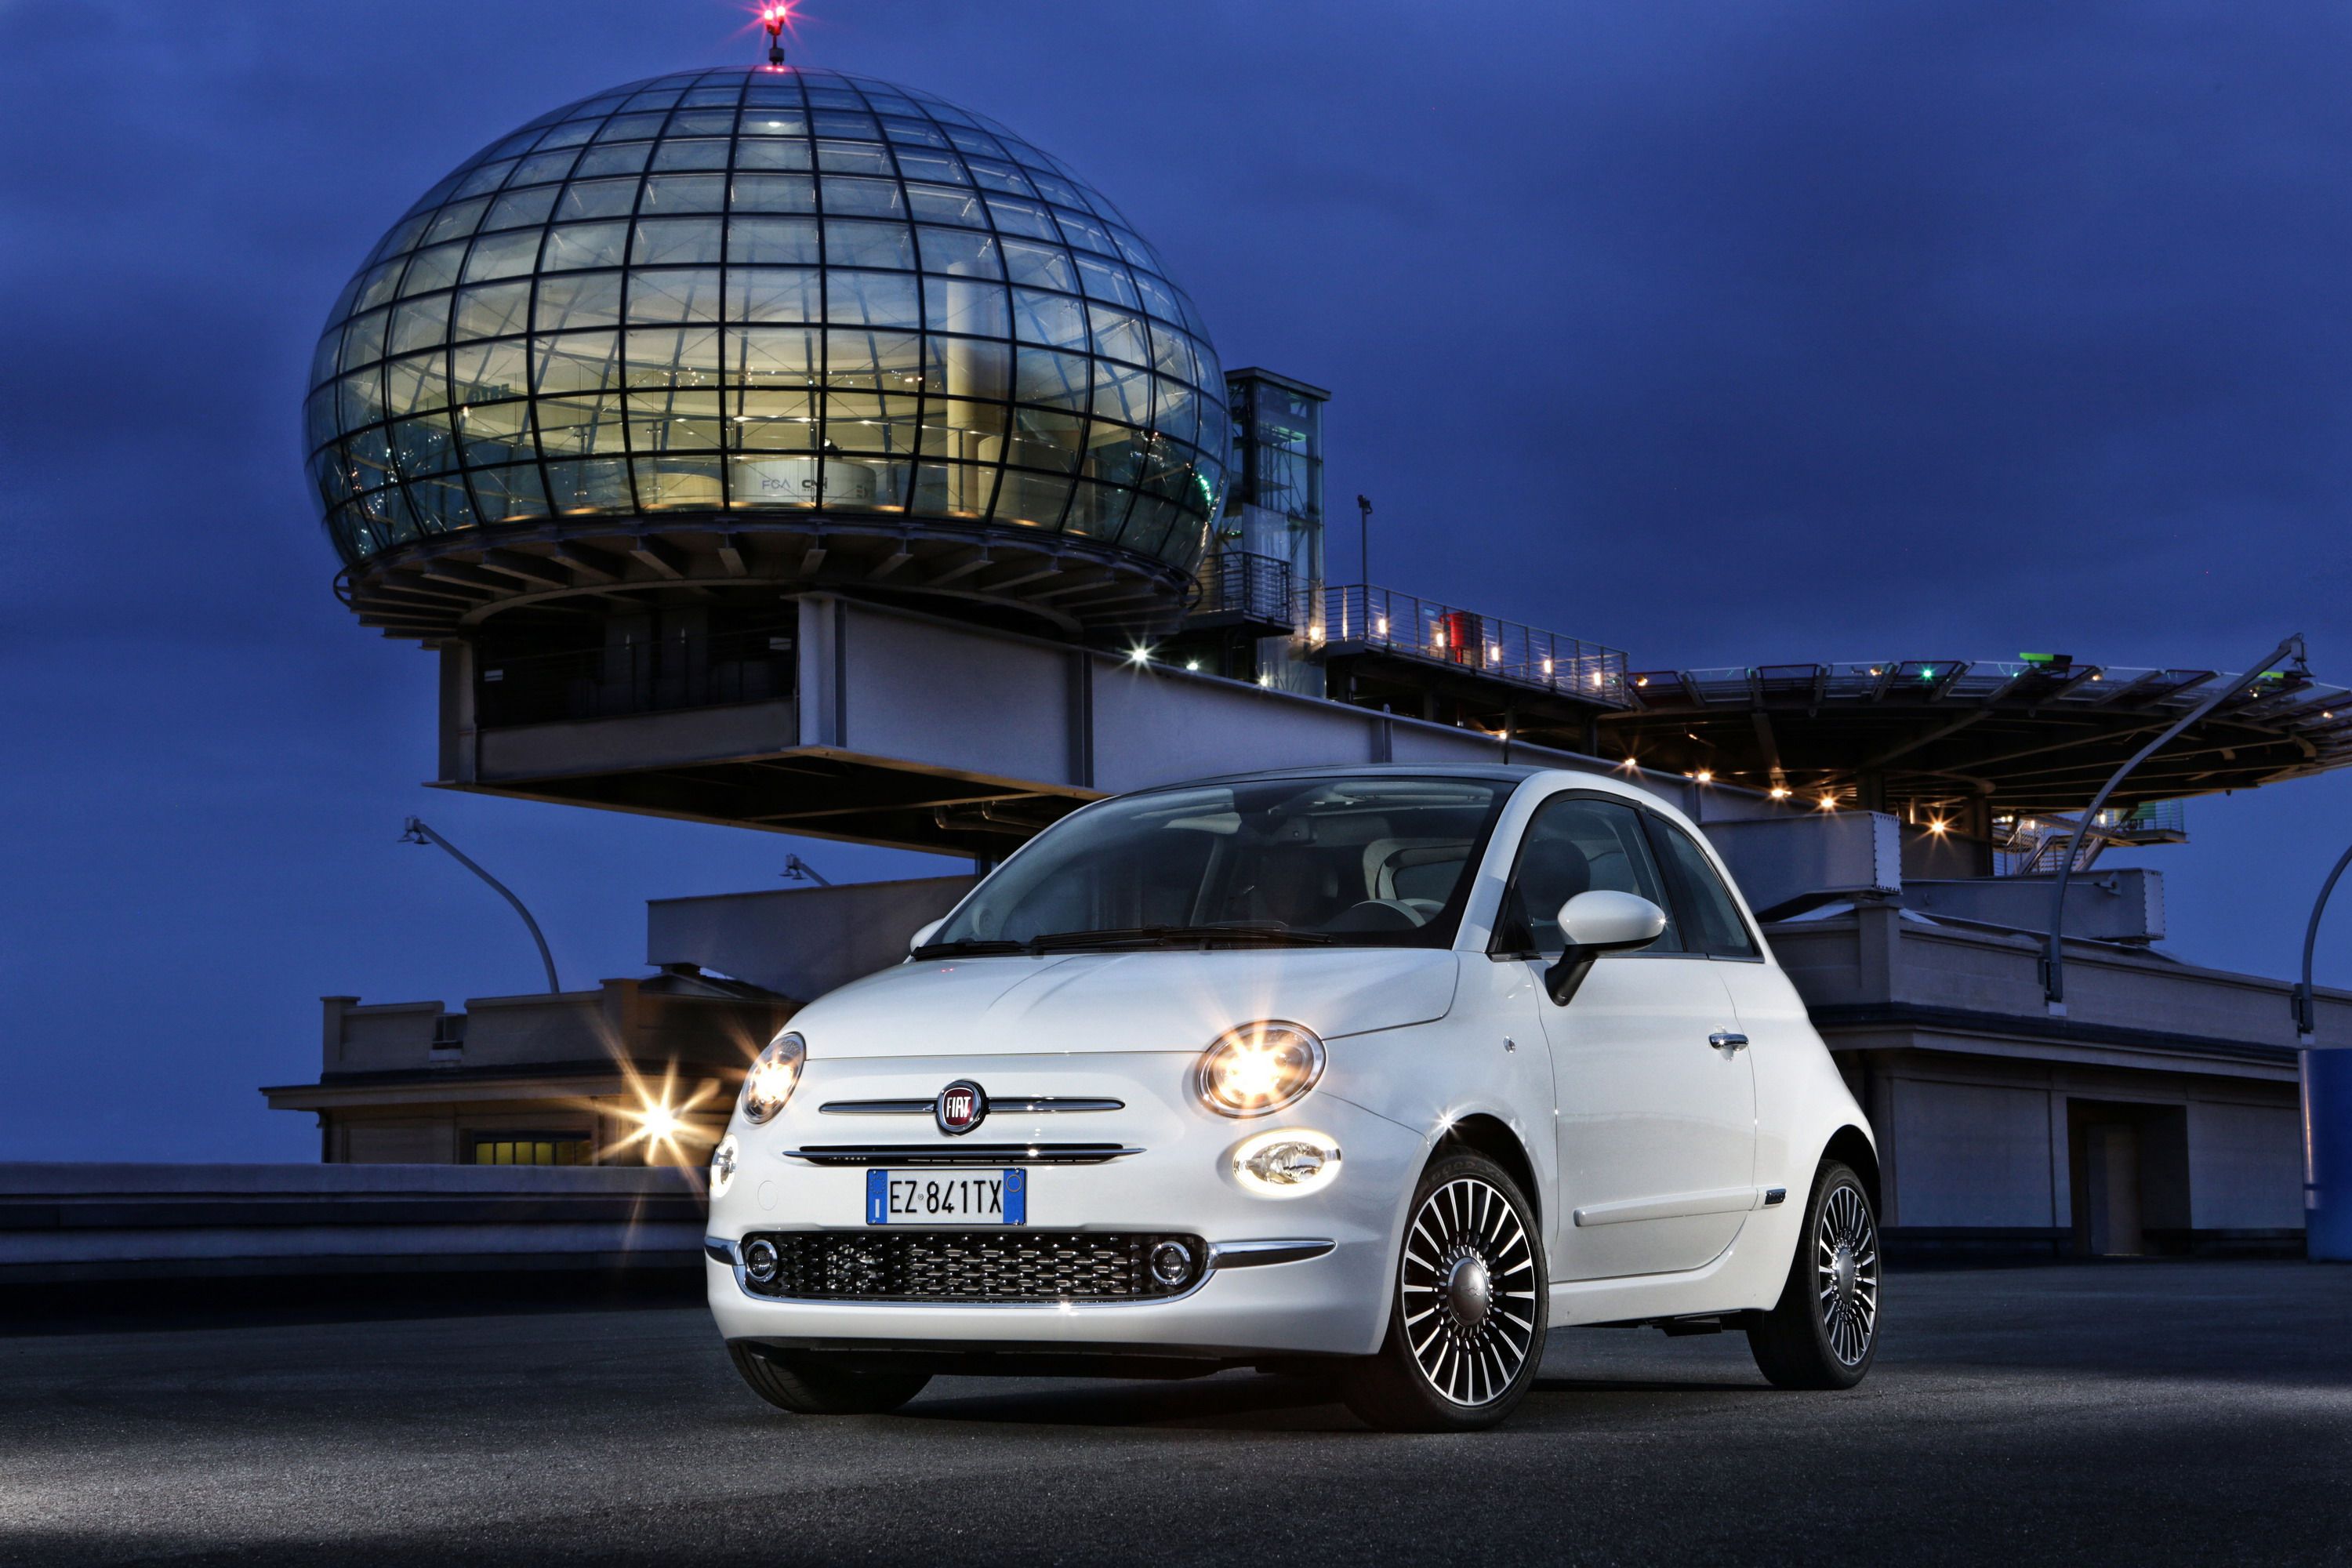 2019 Wallpaper of the Day: 2106 - 2019 Fiat 500